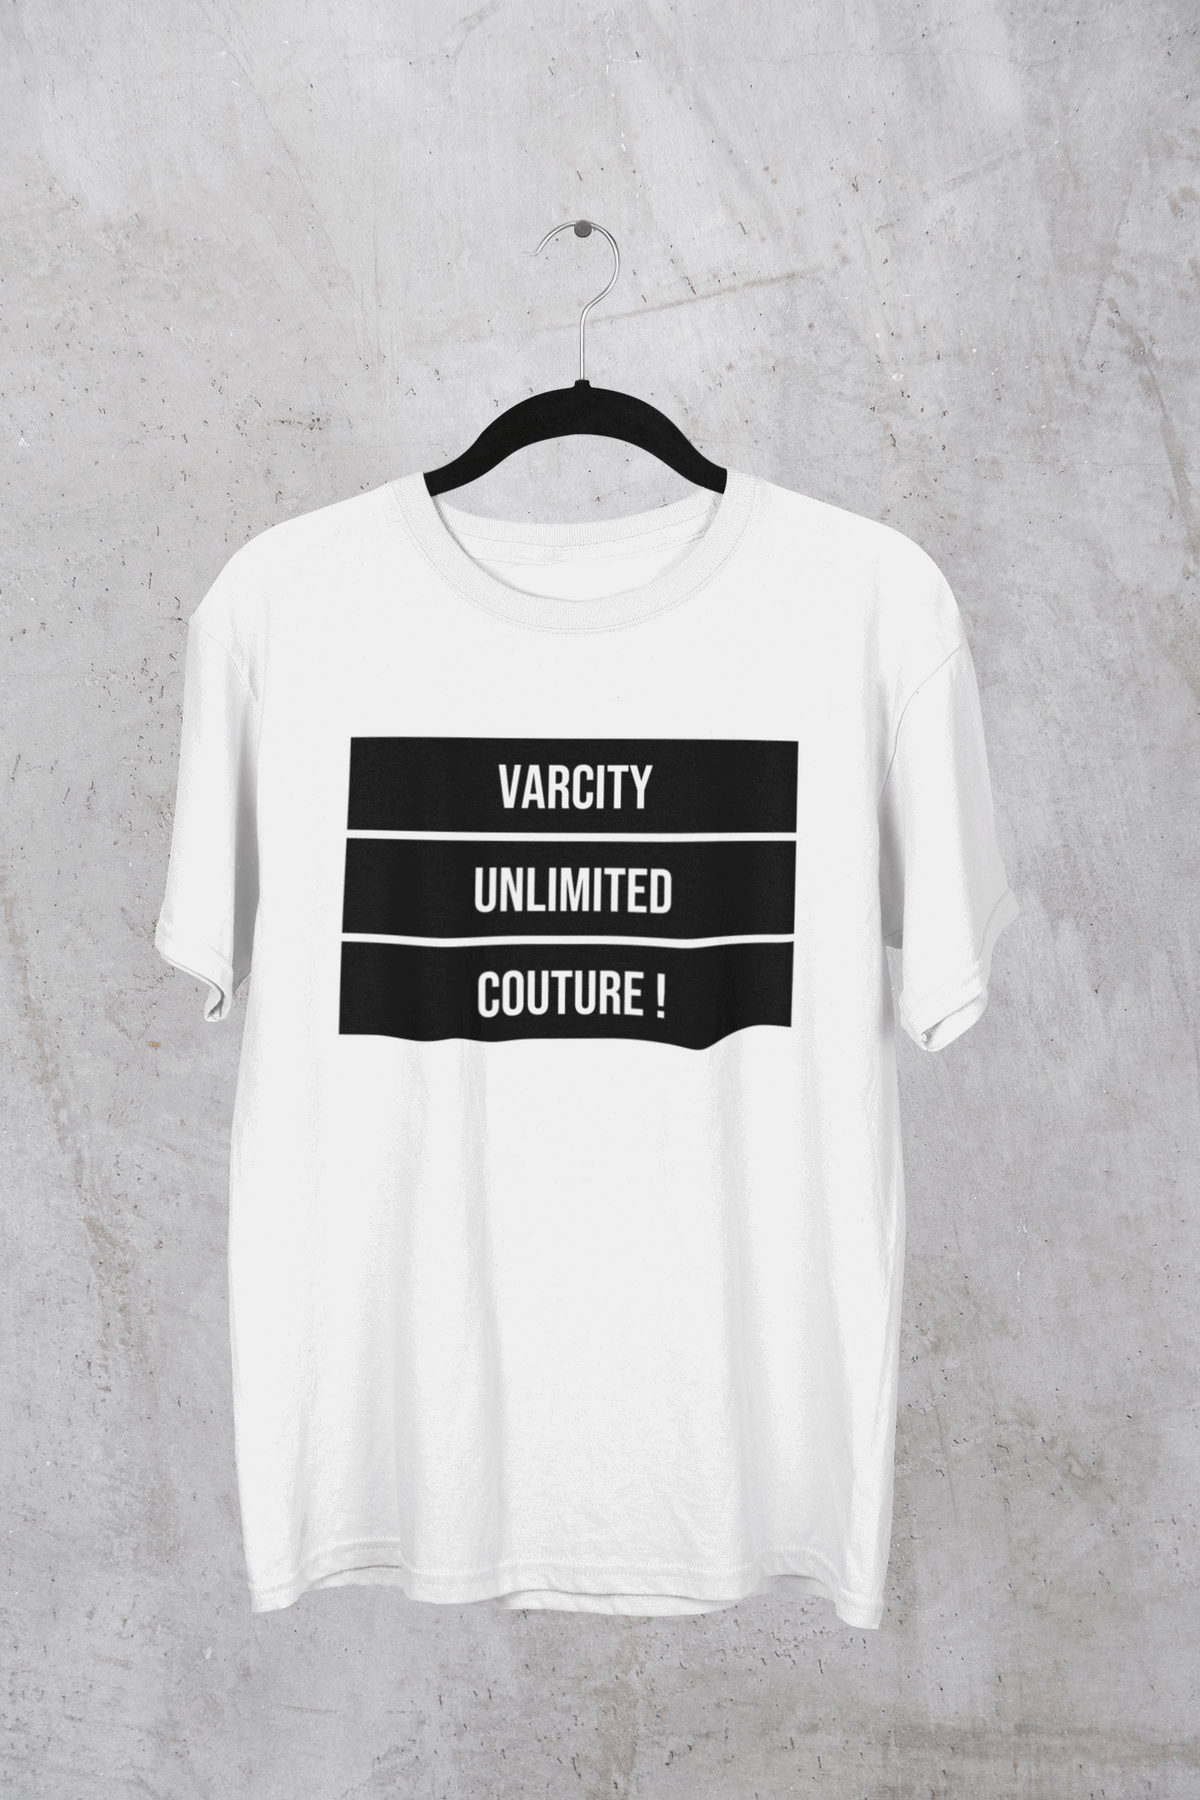 Varcity Unlimited Couture! Bold Statement T Shirt White